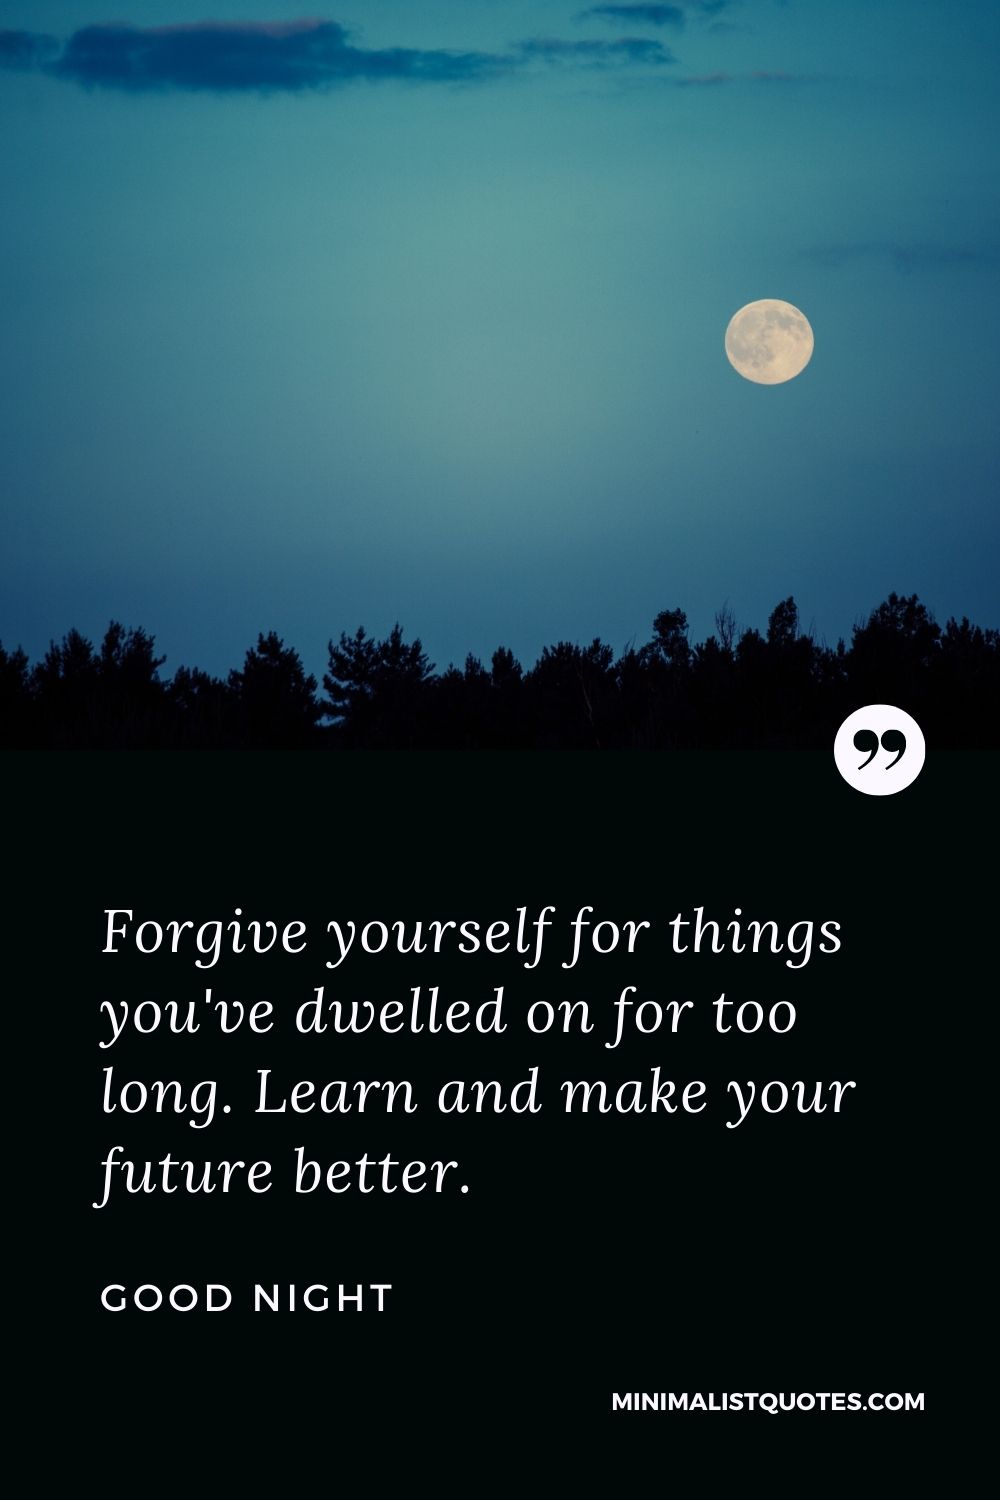 Good Night Wishes - Forgive yourself for things you've dwelled on for too long. Learn and make your future better.